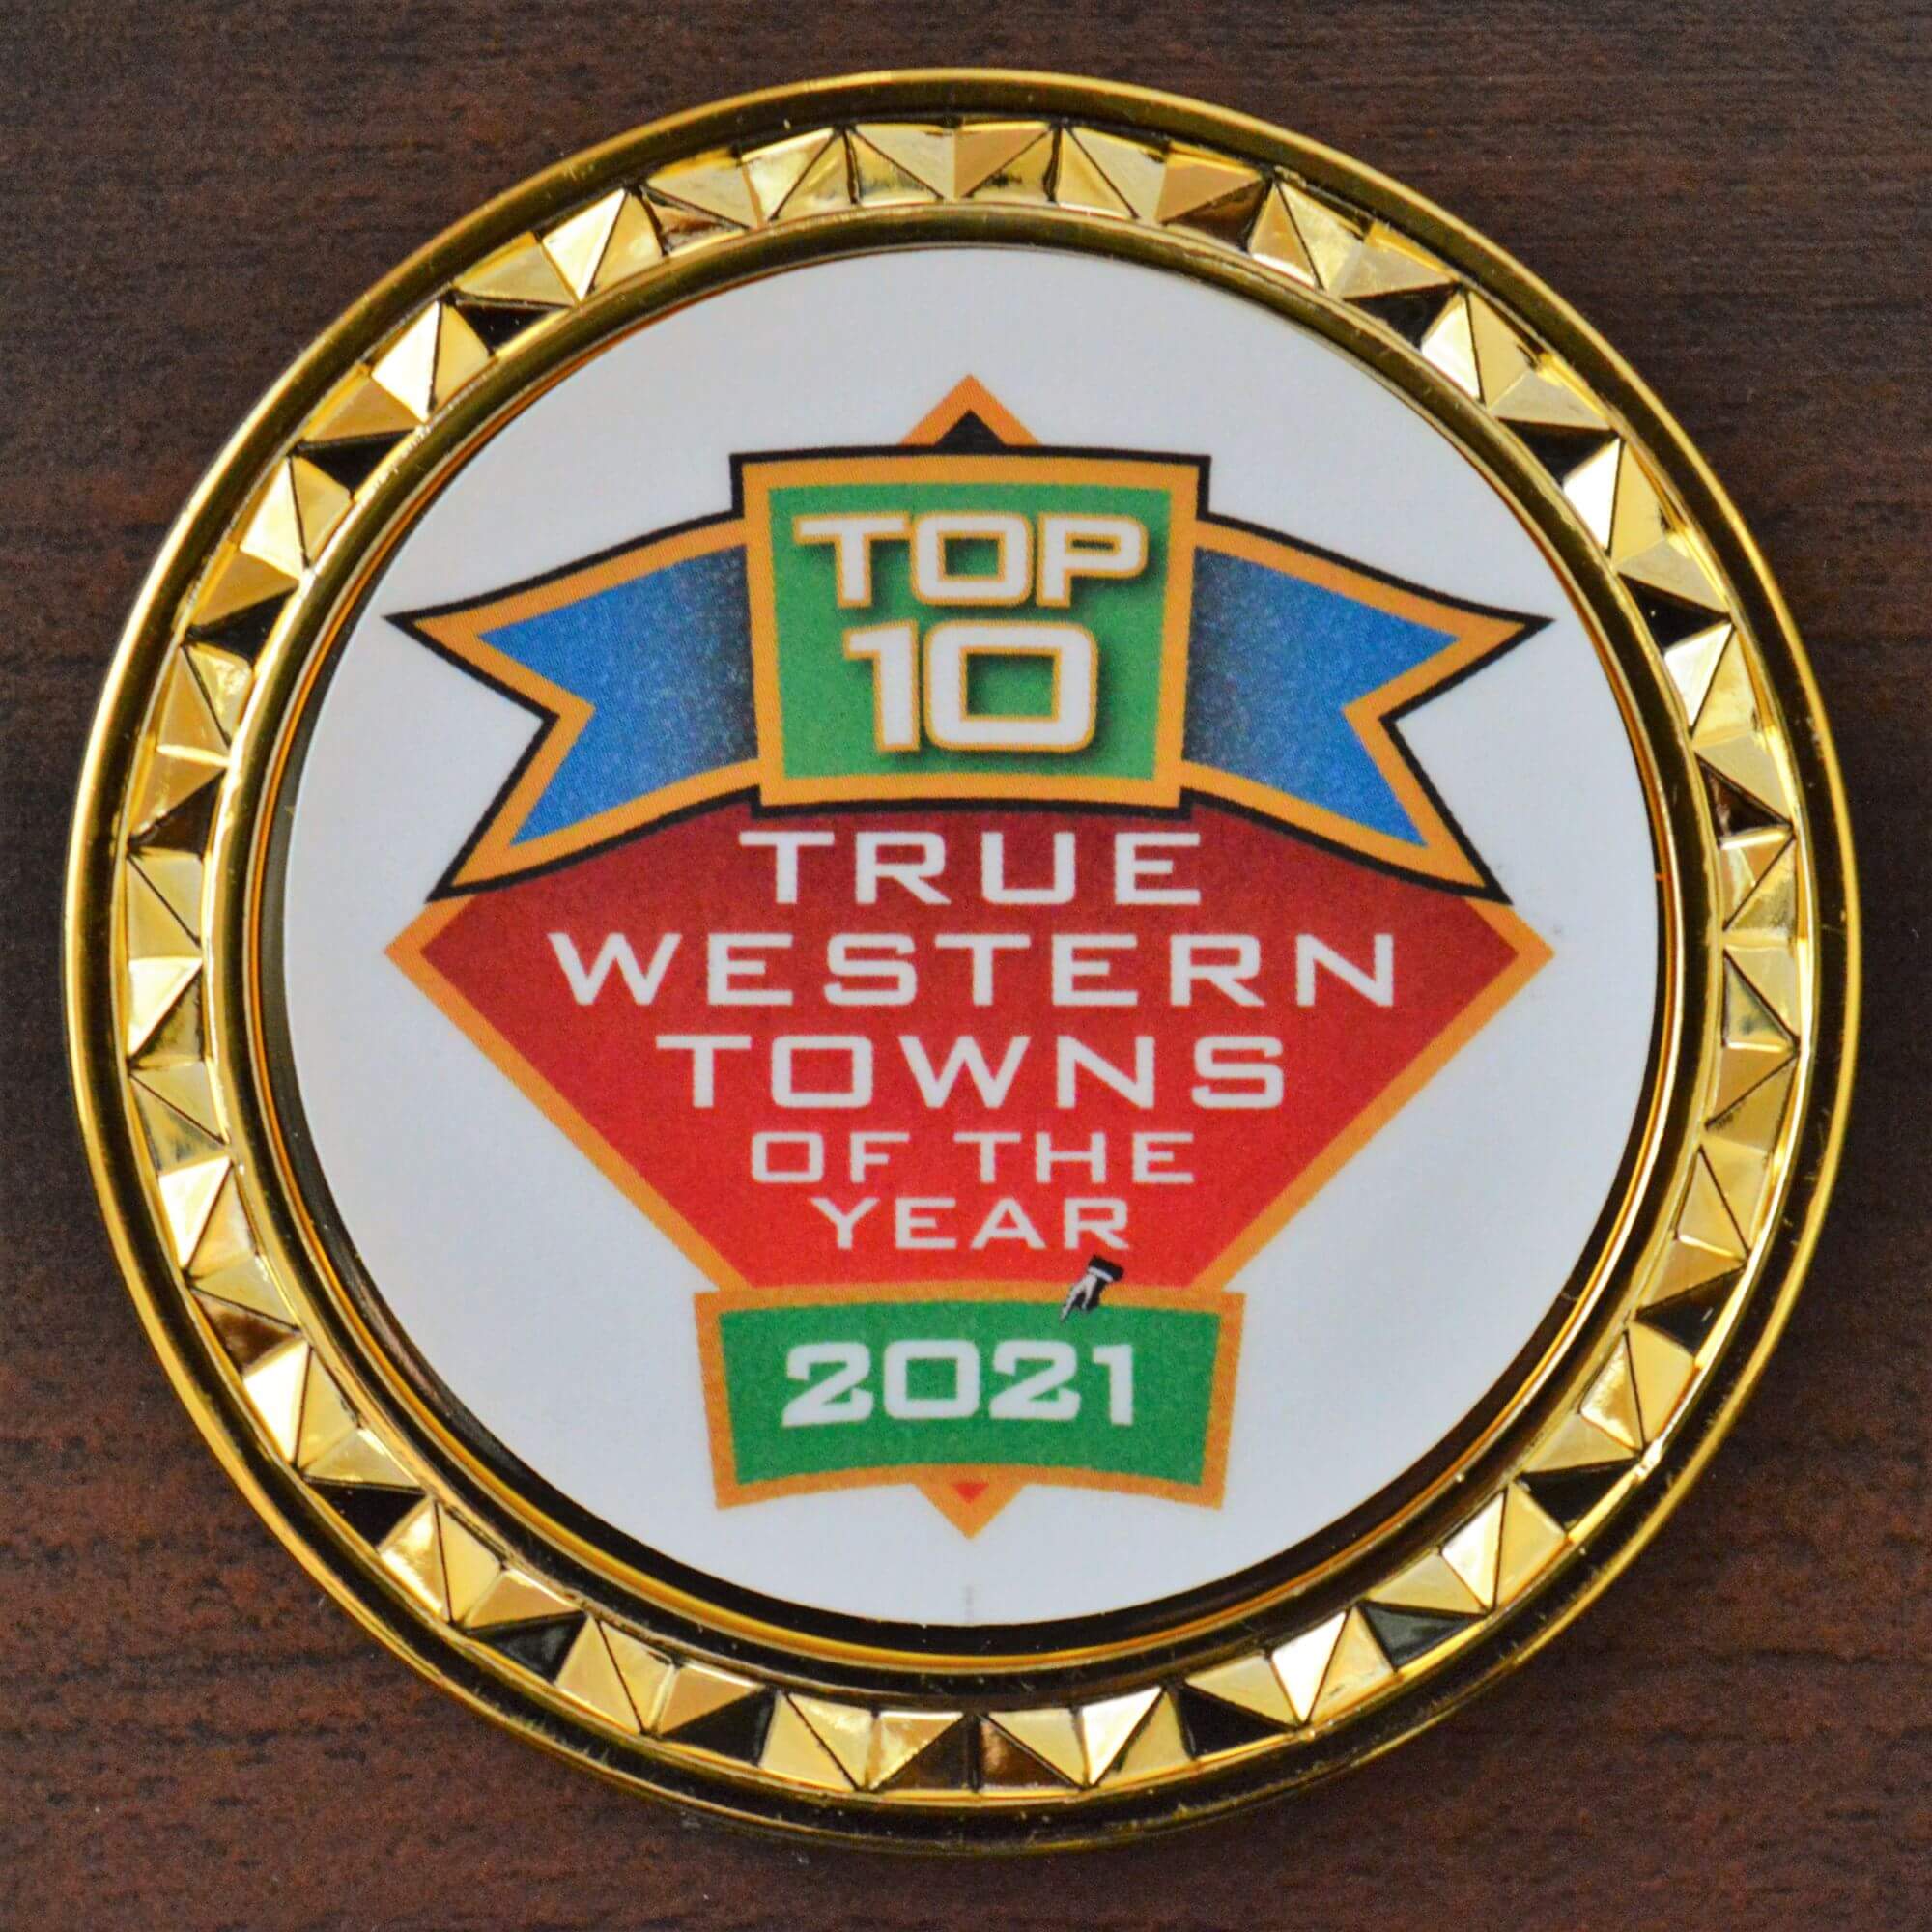 TOP 10 WESTERN TOWNS 2021 - SAN ANGELO CLAIMS #2 SPOT